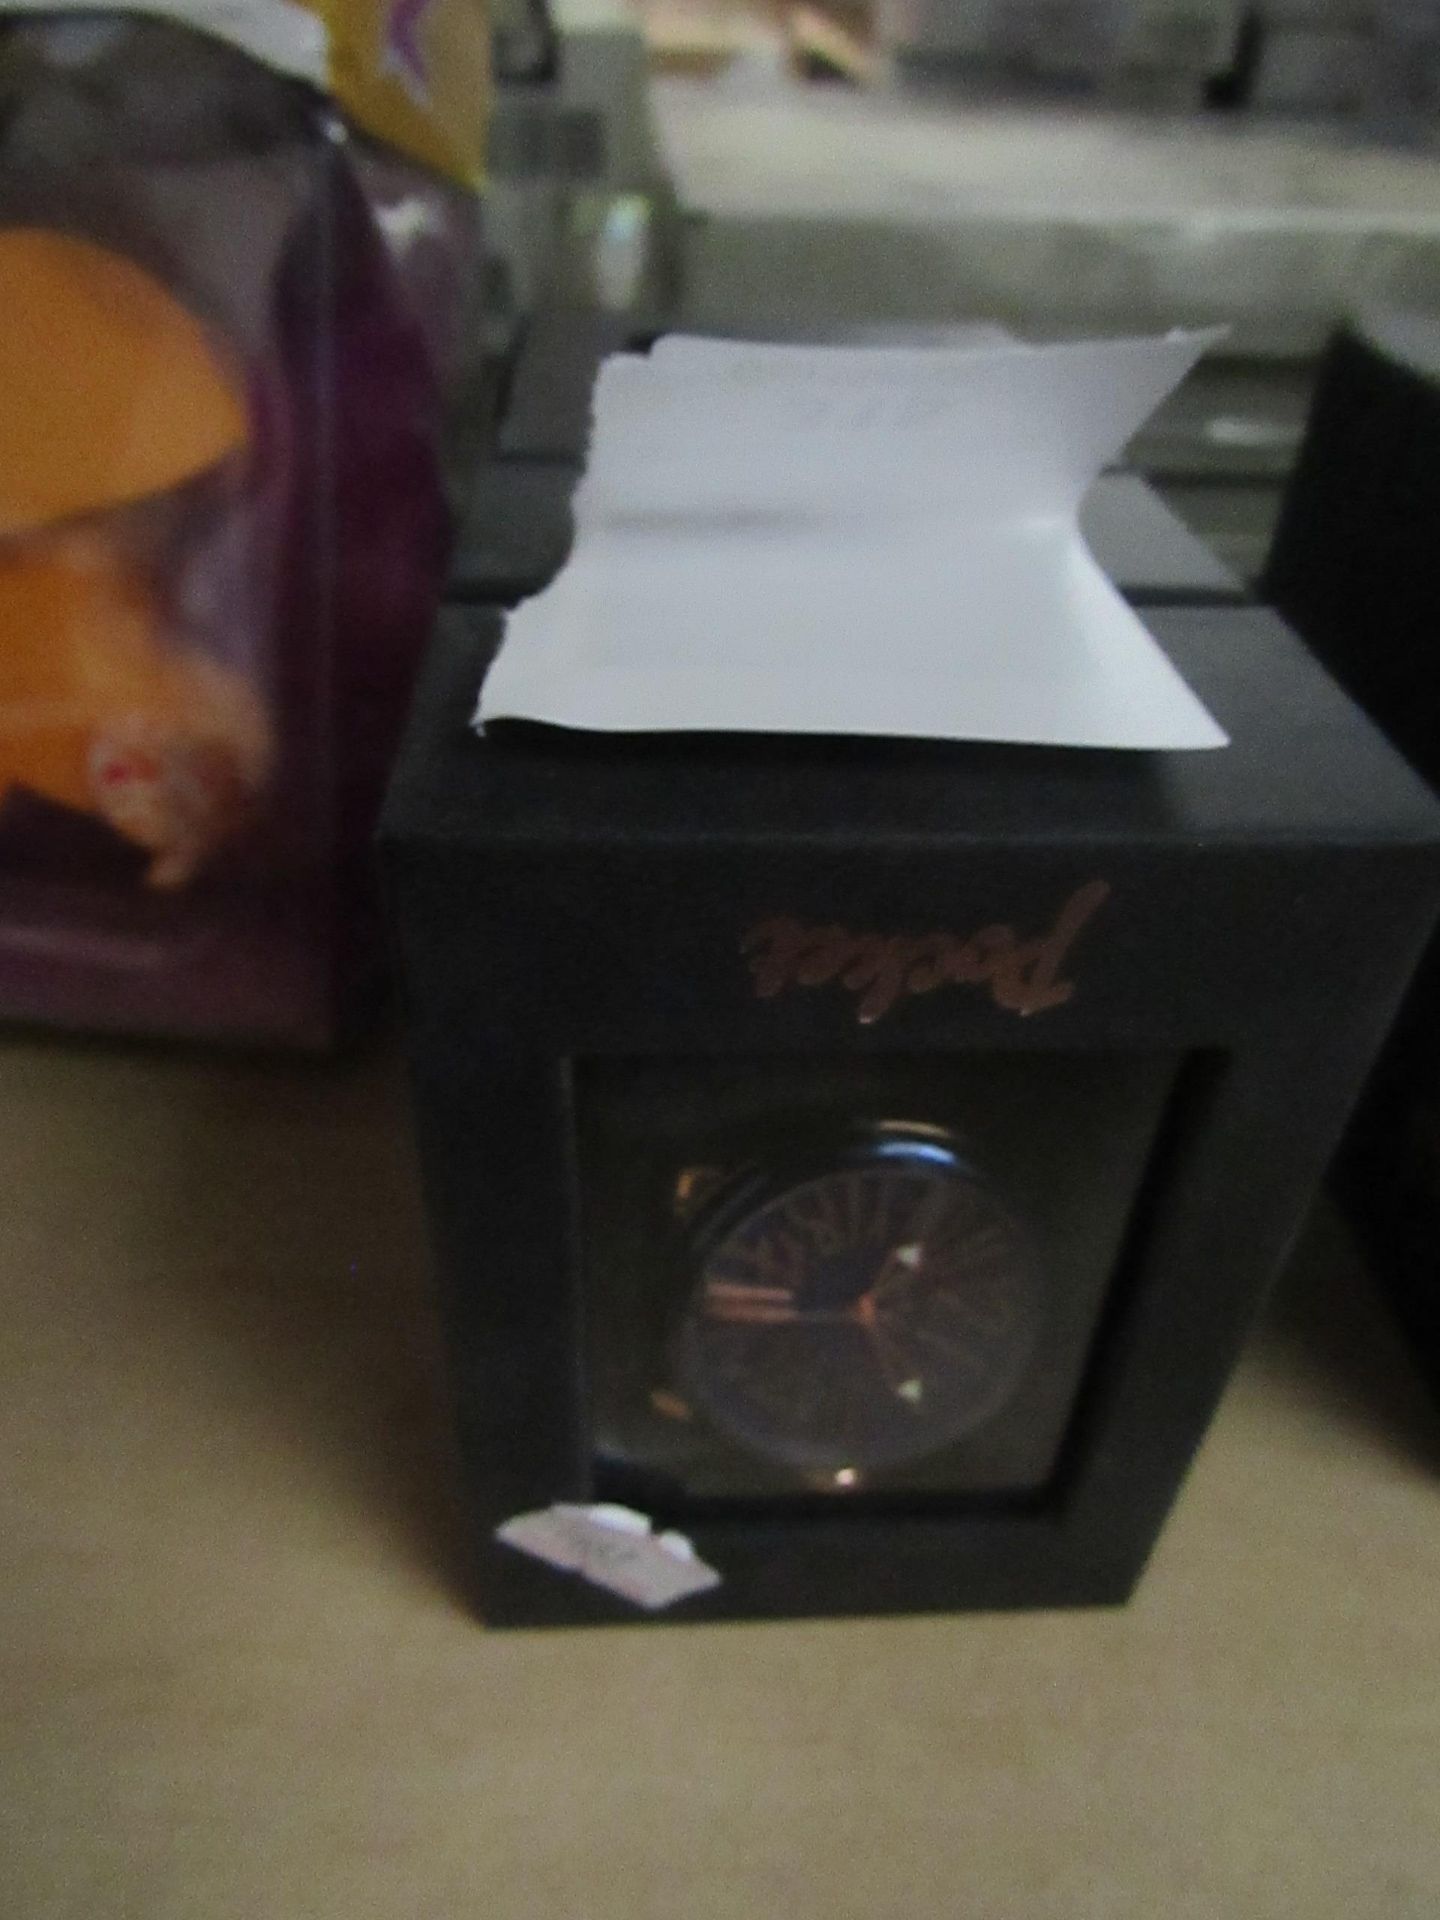 Pocket Branded Wrist Watch. Boxed see image for design - Image 2 of 2